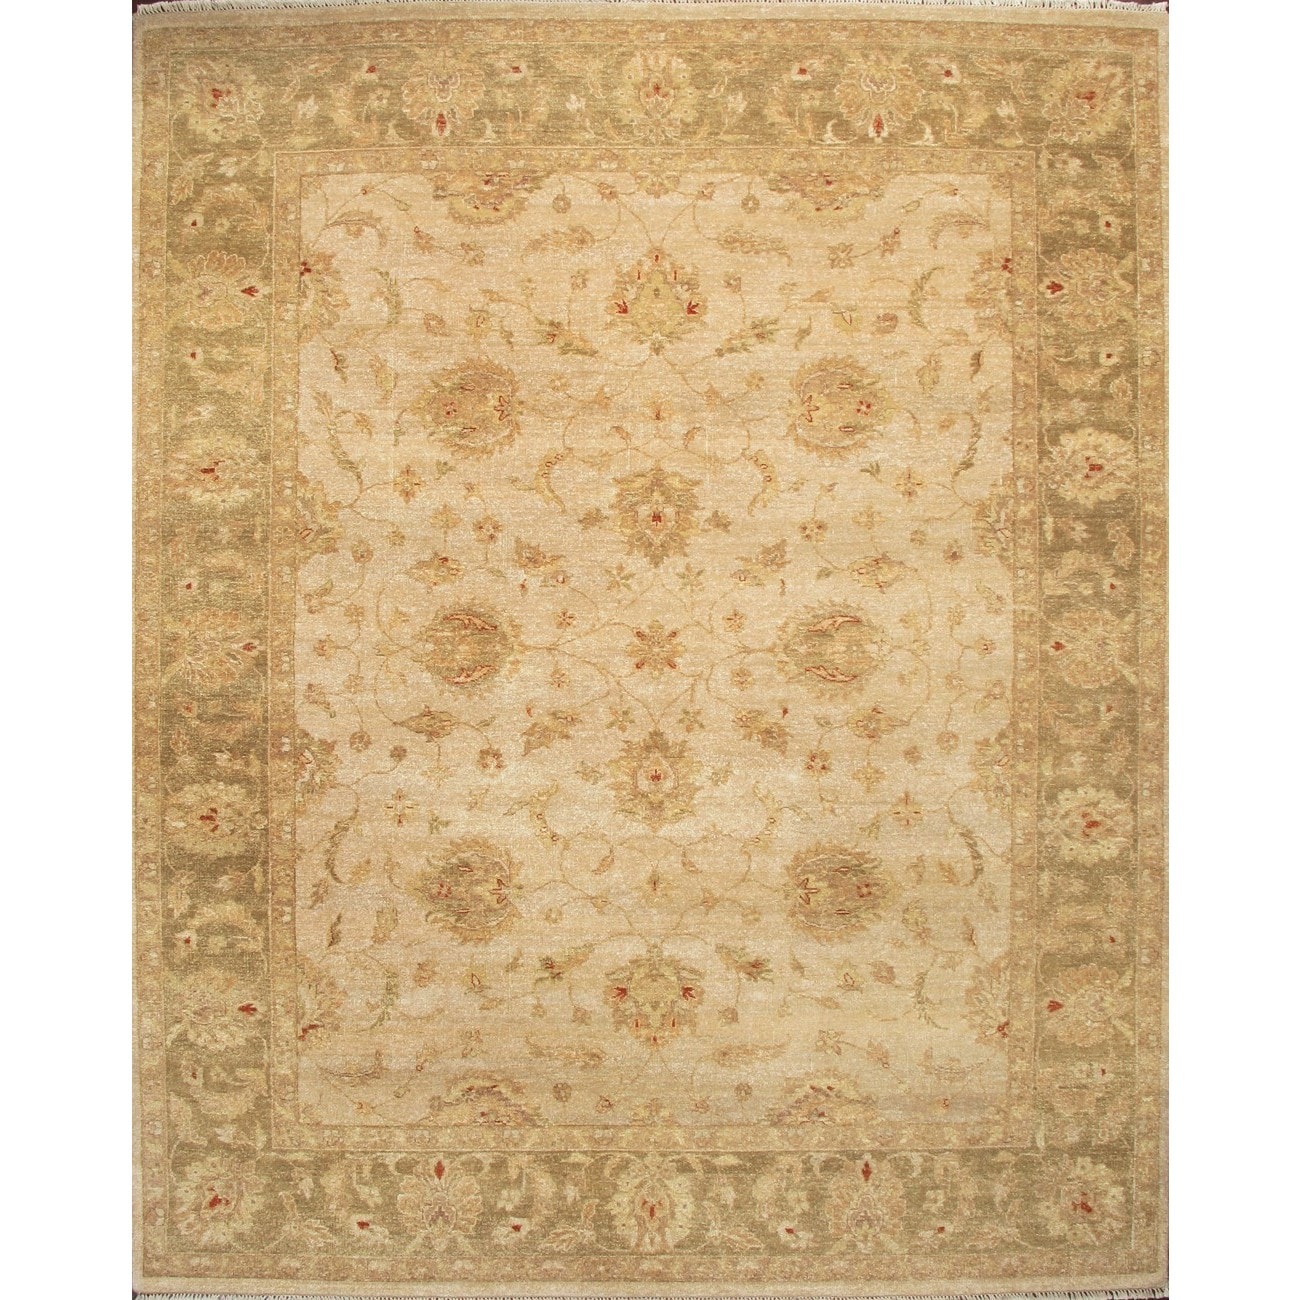 Hand knotted Ziegler Green Beige Vegetable Dyes Wool Rug (6 X 9)